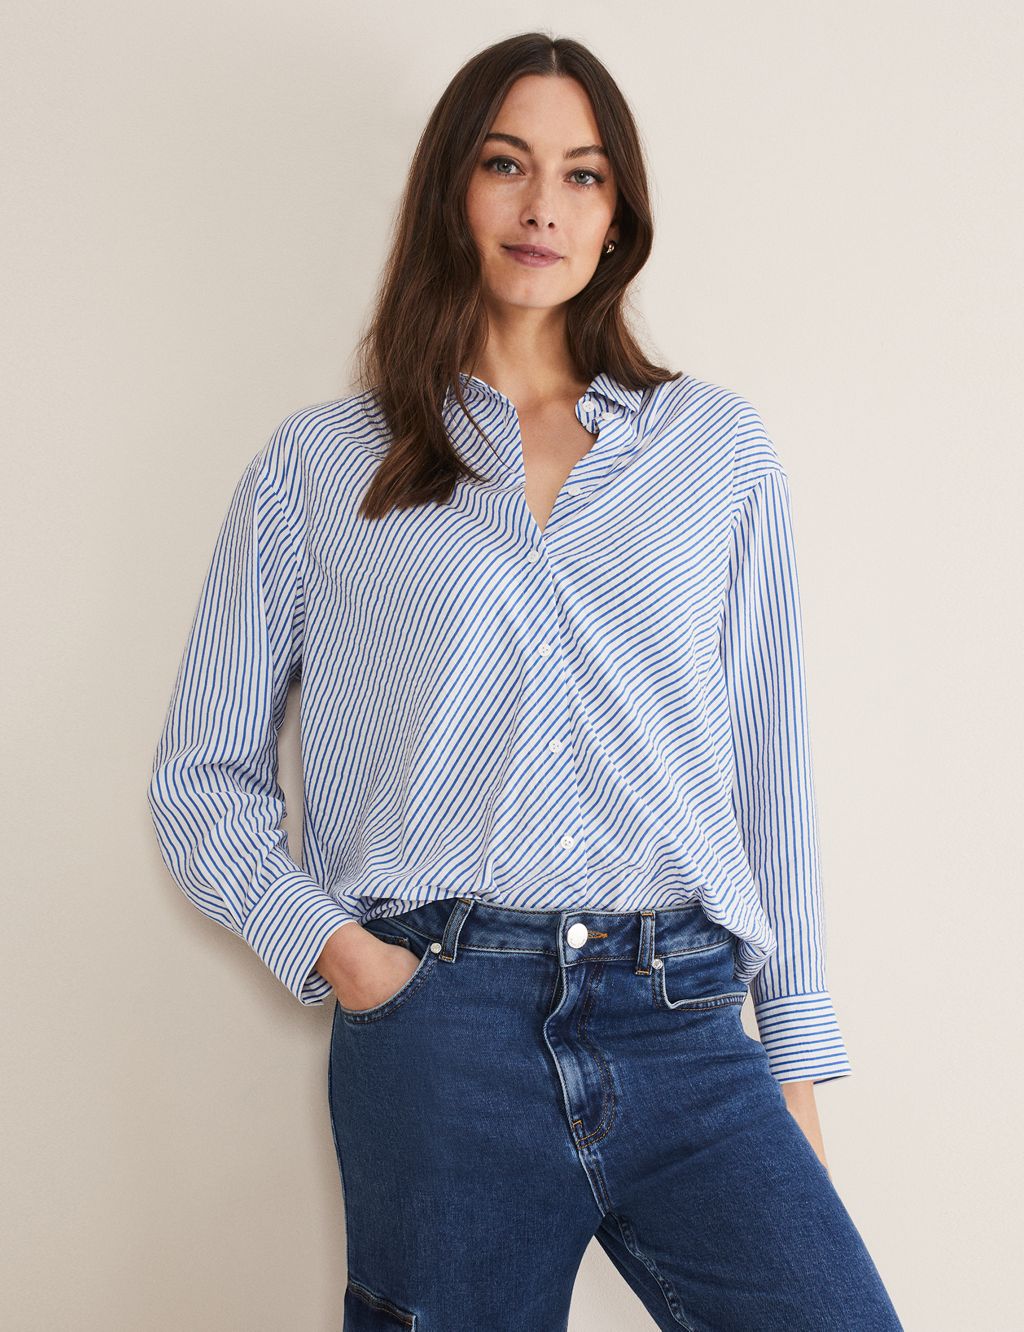 Striped Collared Shirt image 1